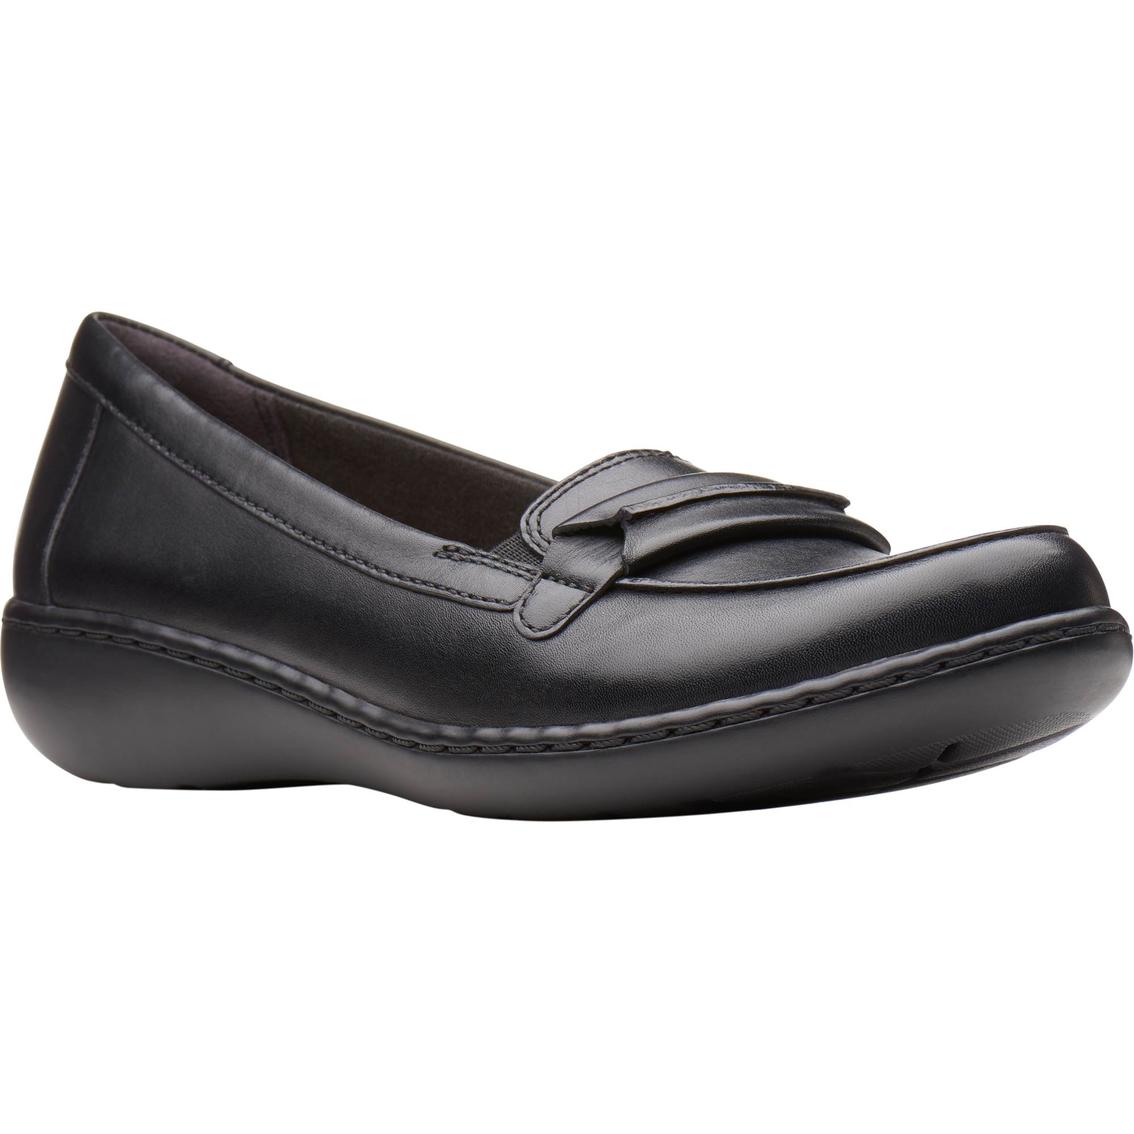 Clarks Ashland Lily Loafers